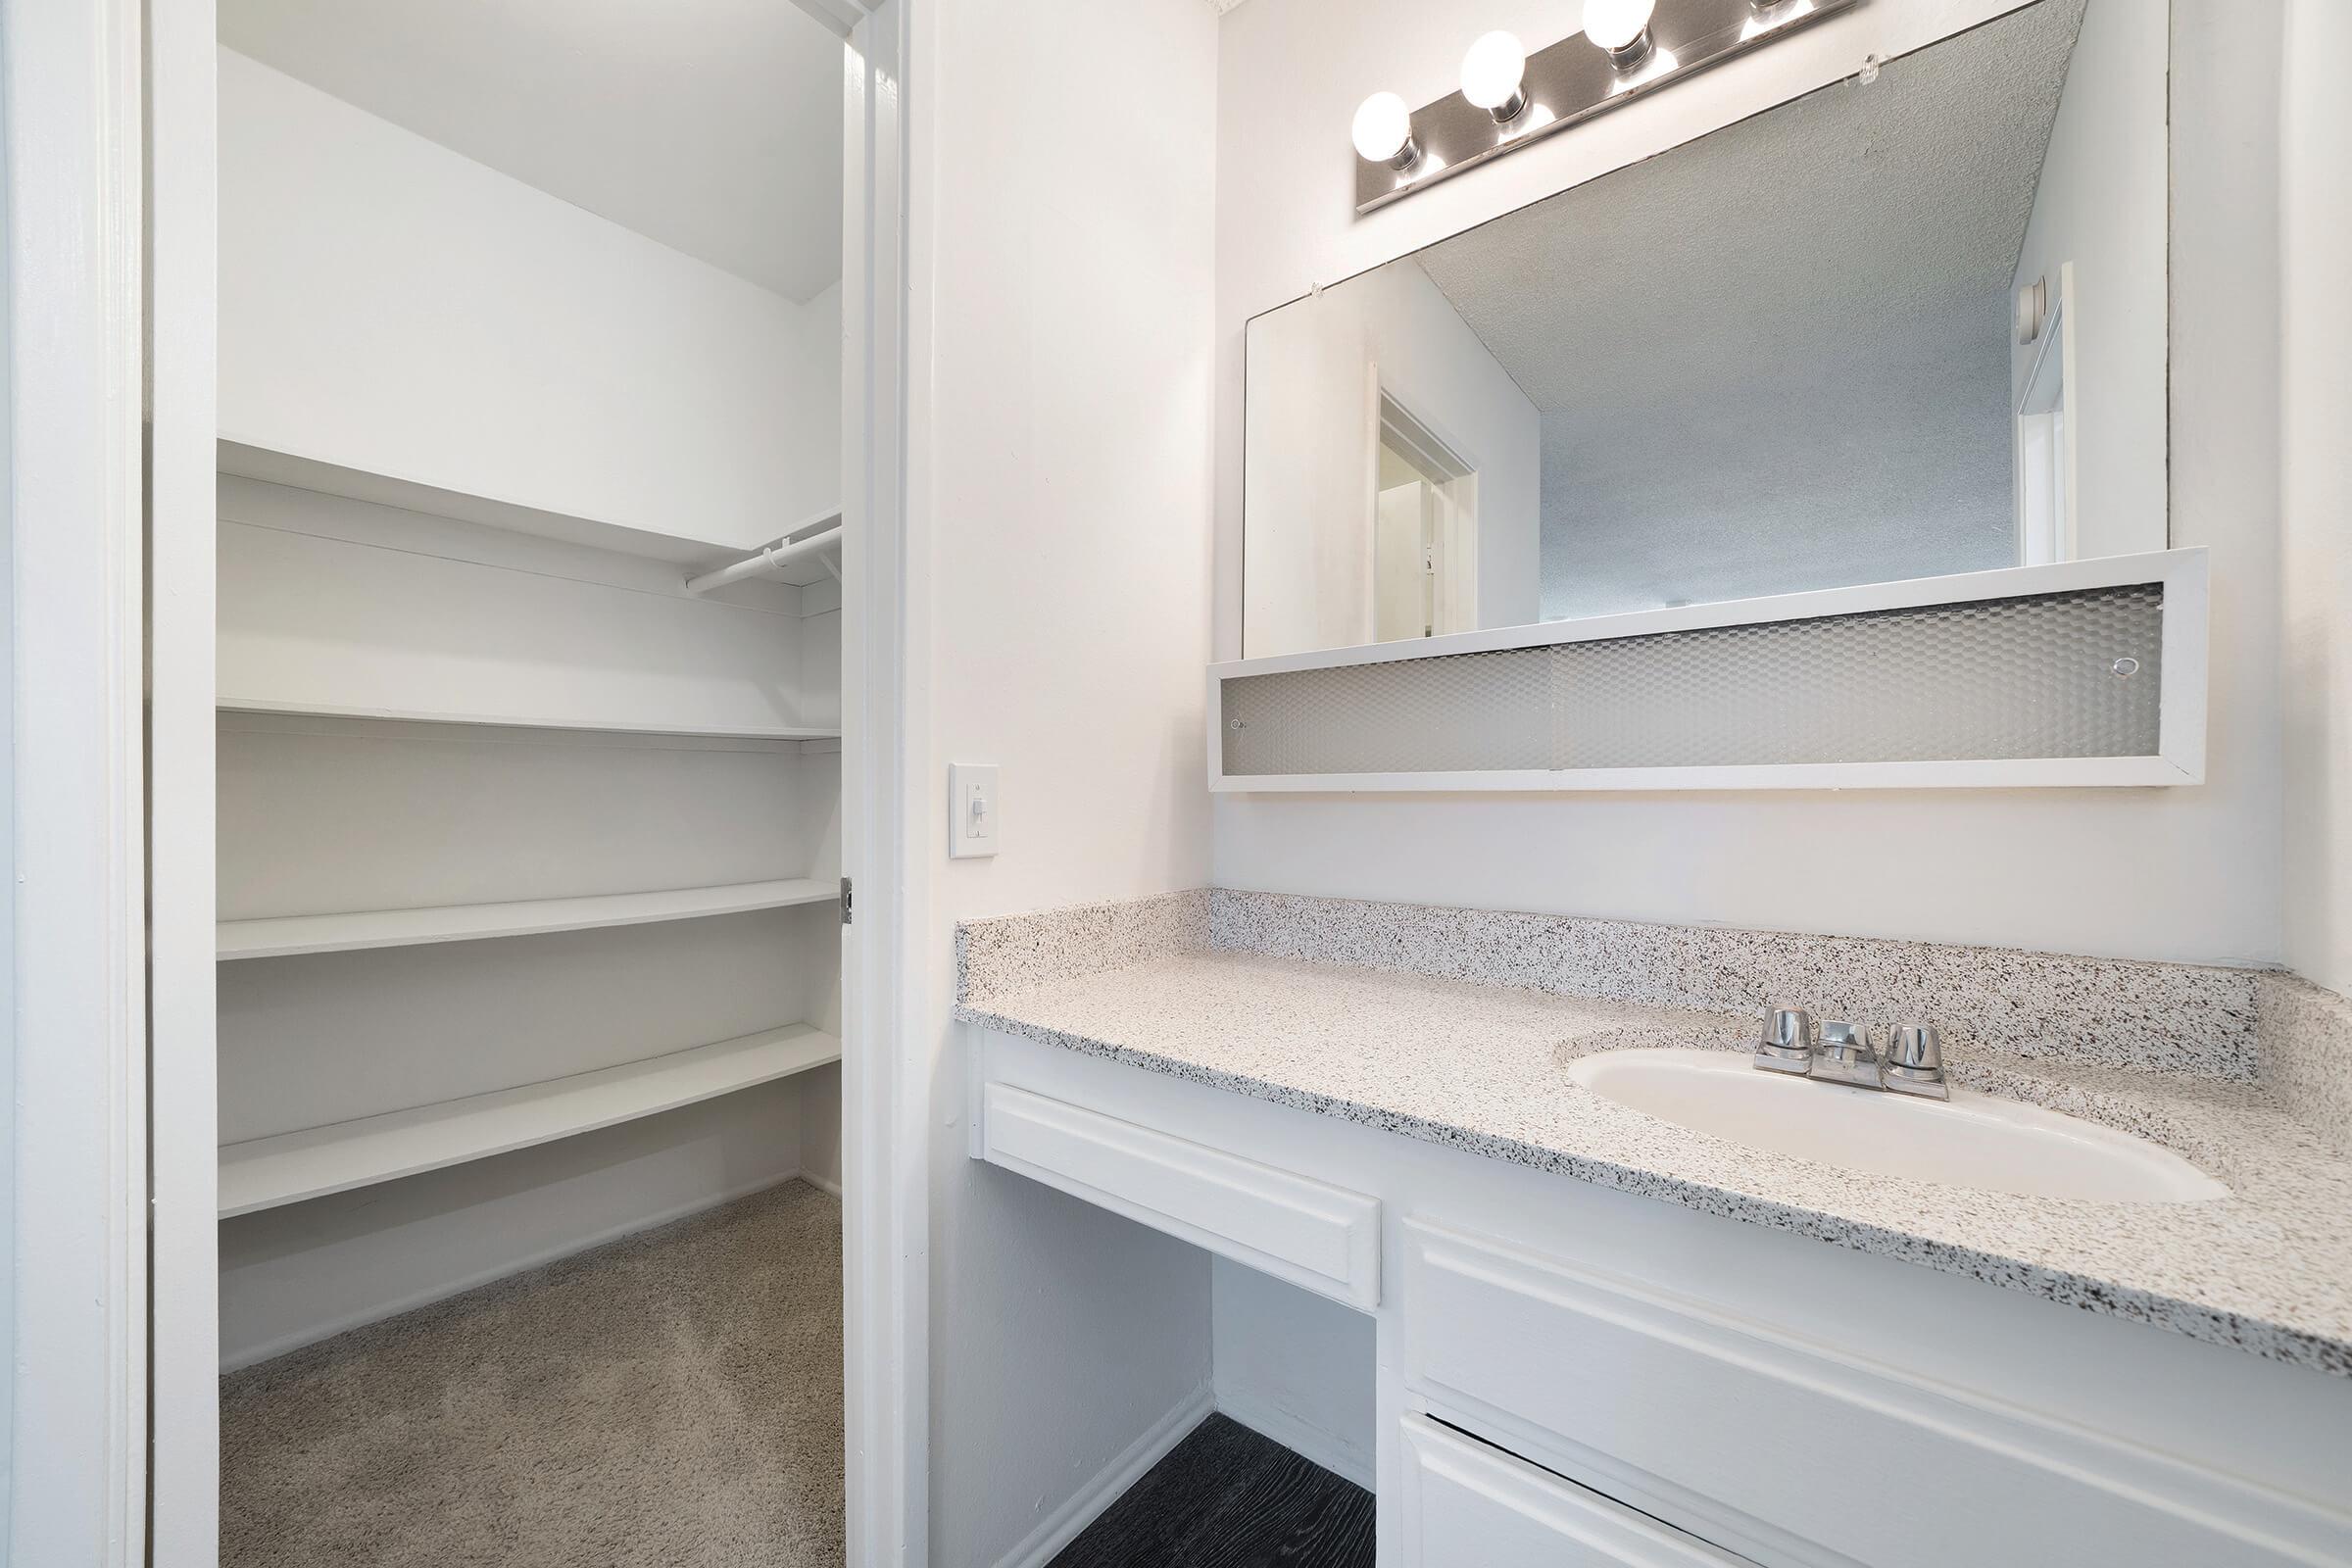 Unfurnished bathroom sink with open walk-in closet